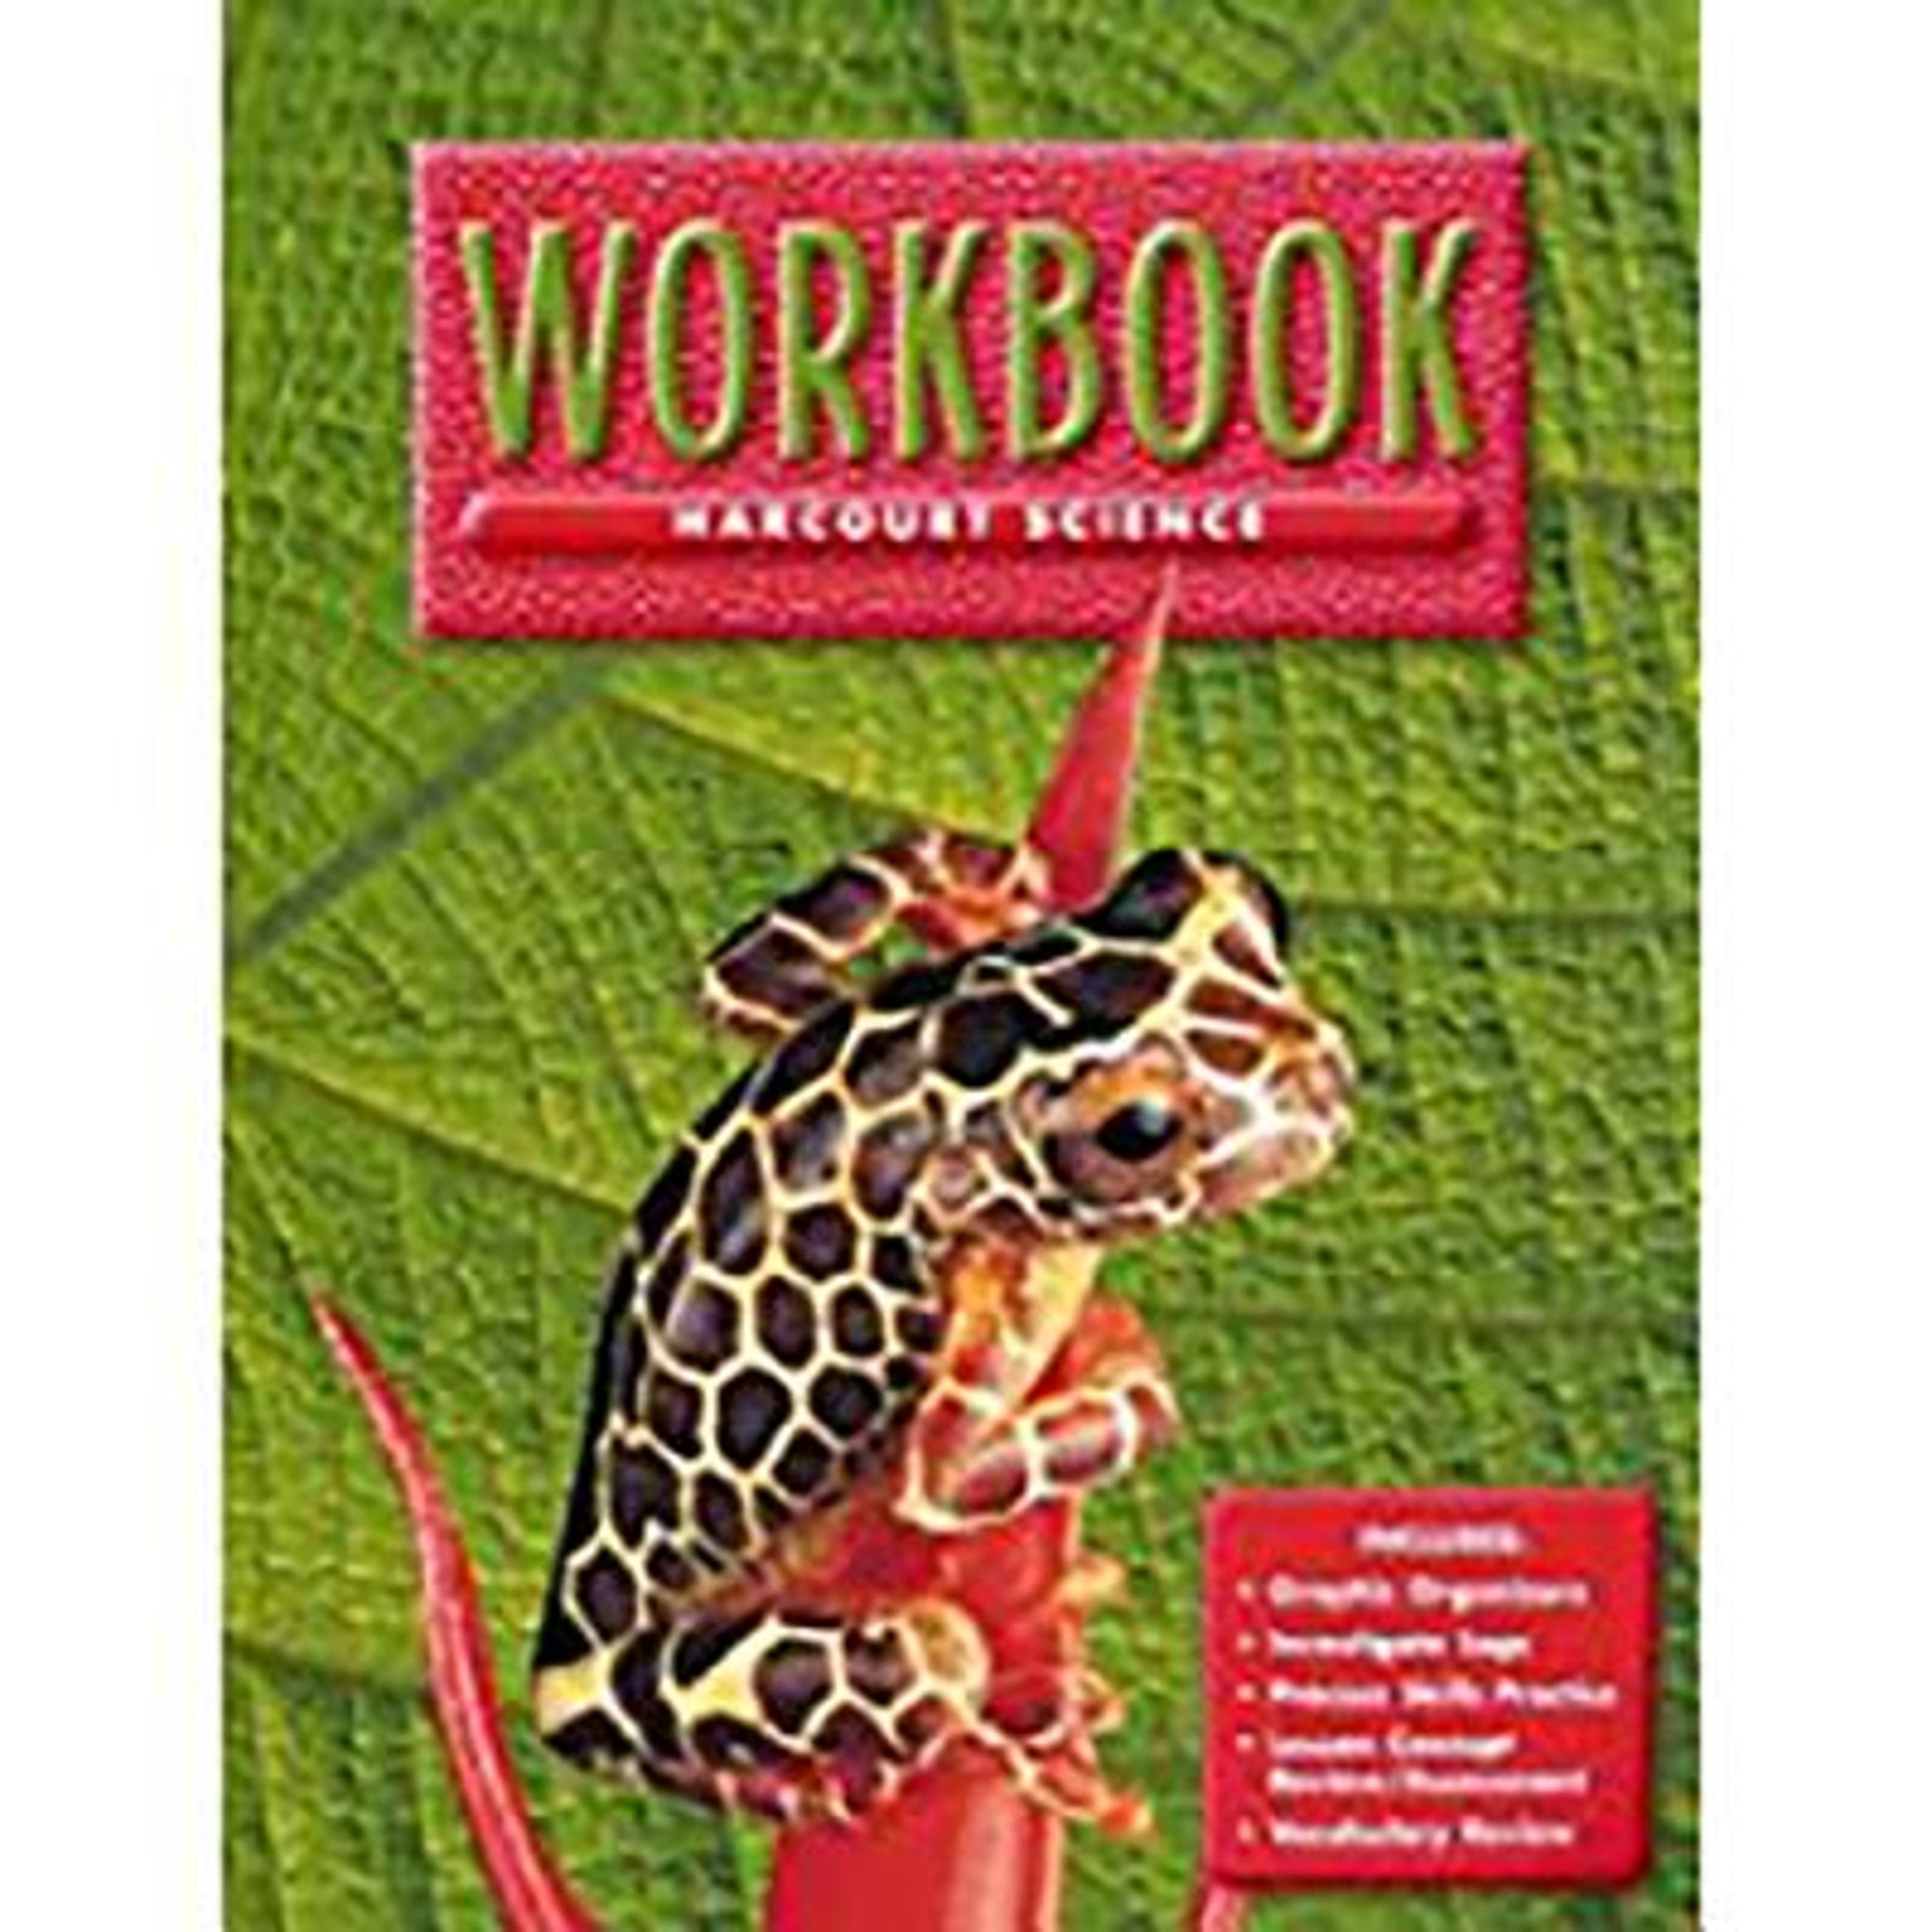 Pre-Owned Te Workbook Gr5 Harcourt Science 2000 (Paperback) by HSP